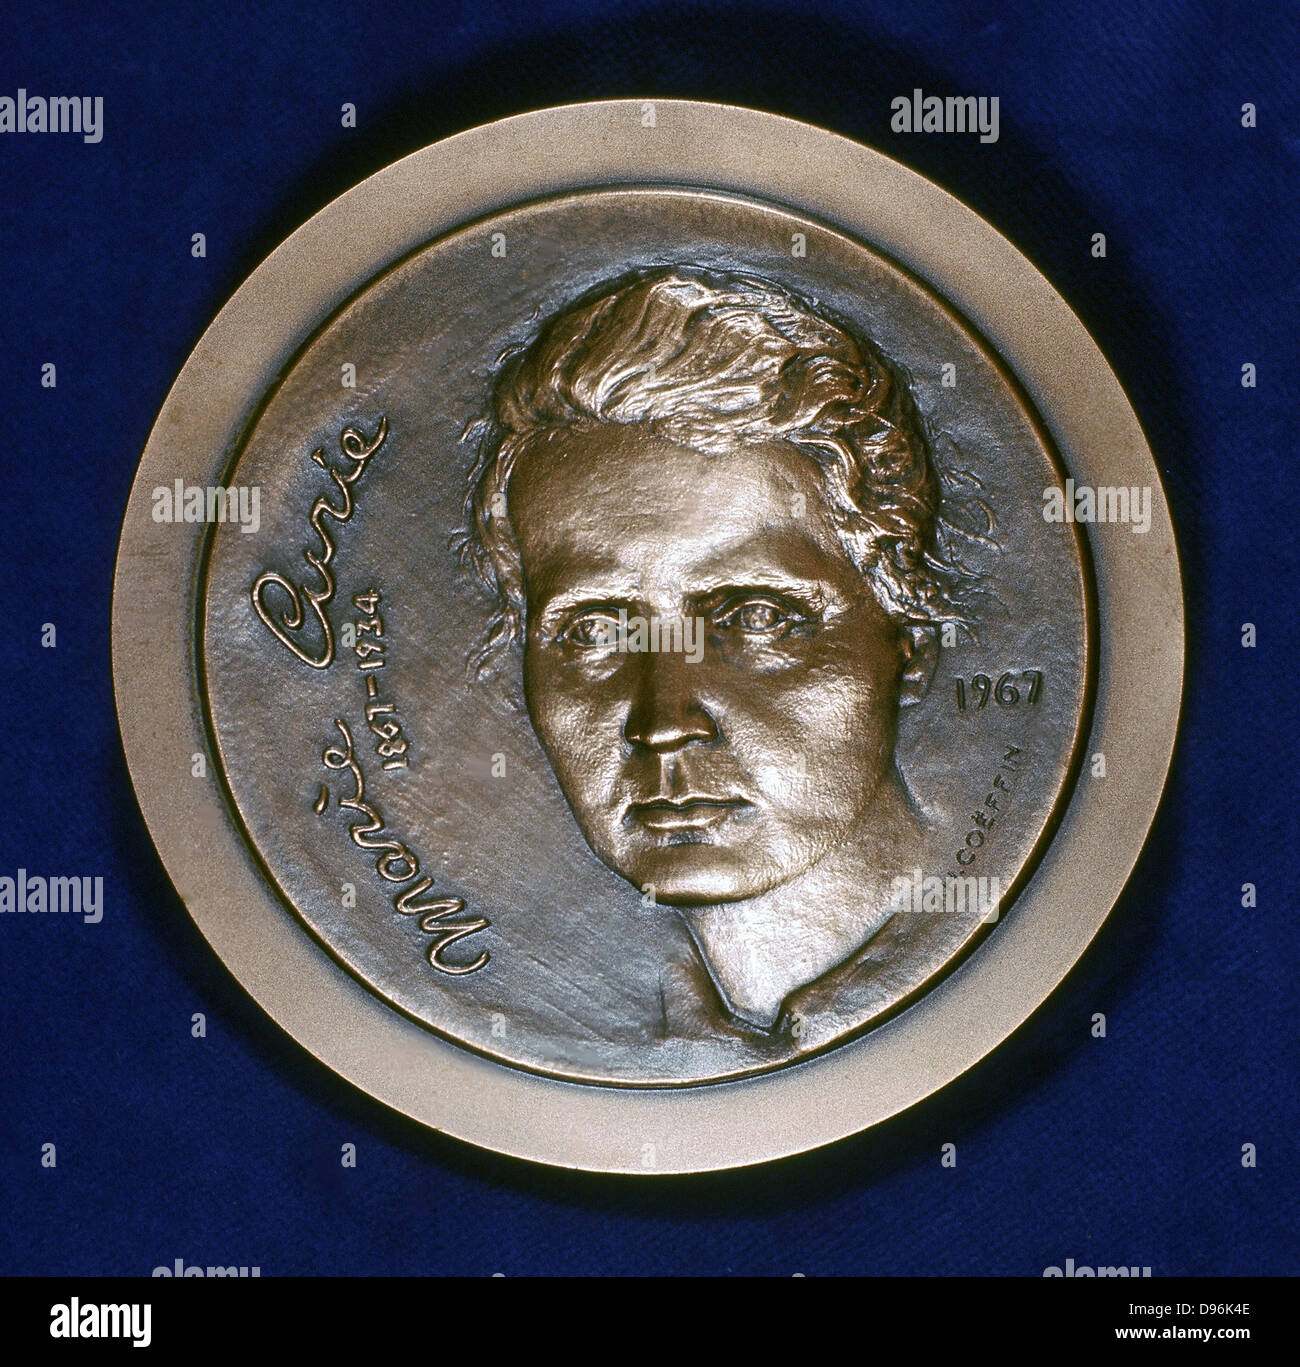 Marie Sklodowska Curie (1867-1934) Polish-born French physicist. Obverse of medal issued in 1967 to commemorate the centenary of her birth and celebrating the isolation of Polonium and Radium which she achieved in 1898 Stock Photo